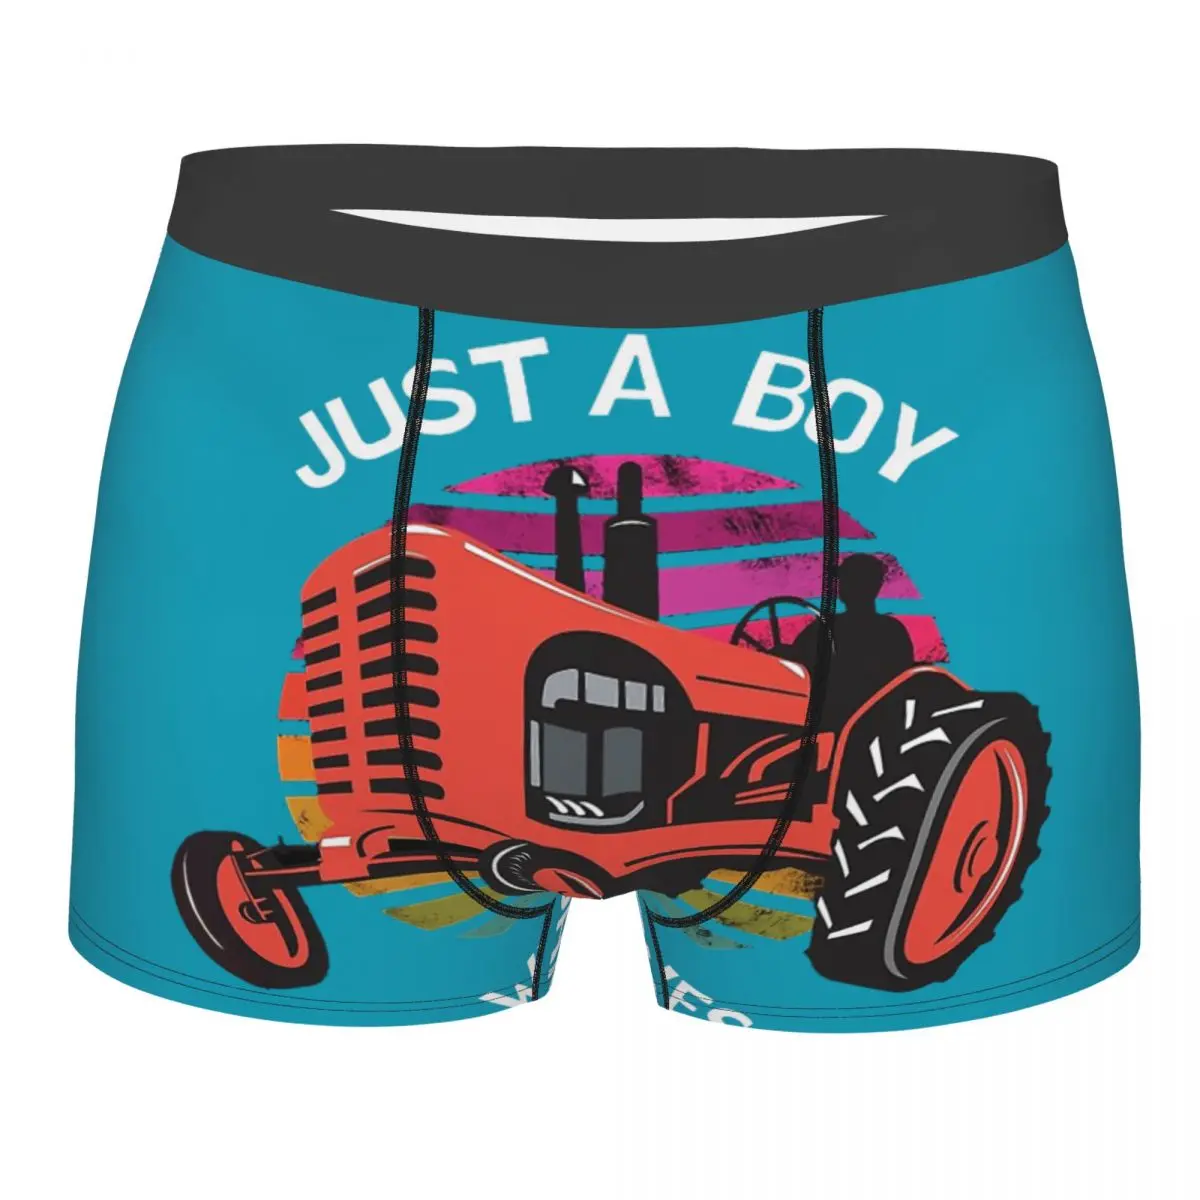 red Farm Tractor Men Boxer Briefs Underpants Highly Breathable High Quality Gift Idea pngtree farming tractor green men s boxer briefs special highly breathable underpants top quality 3d print shorts gift idea